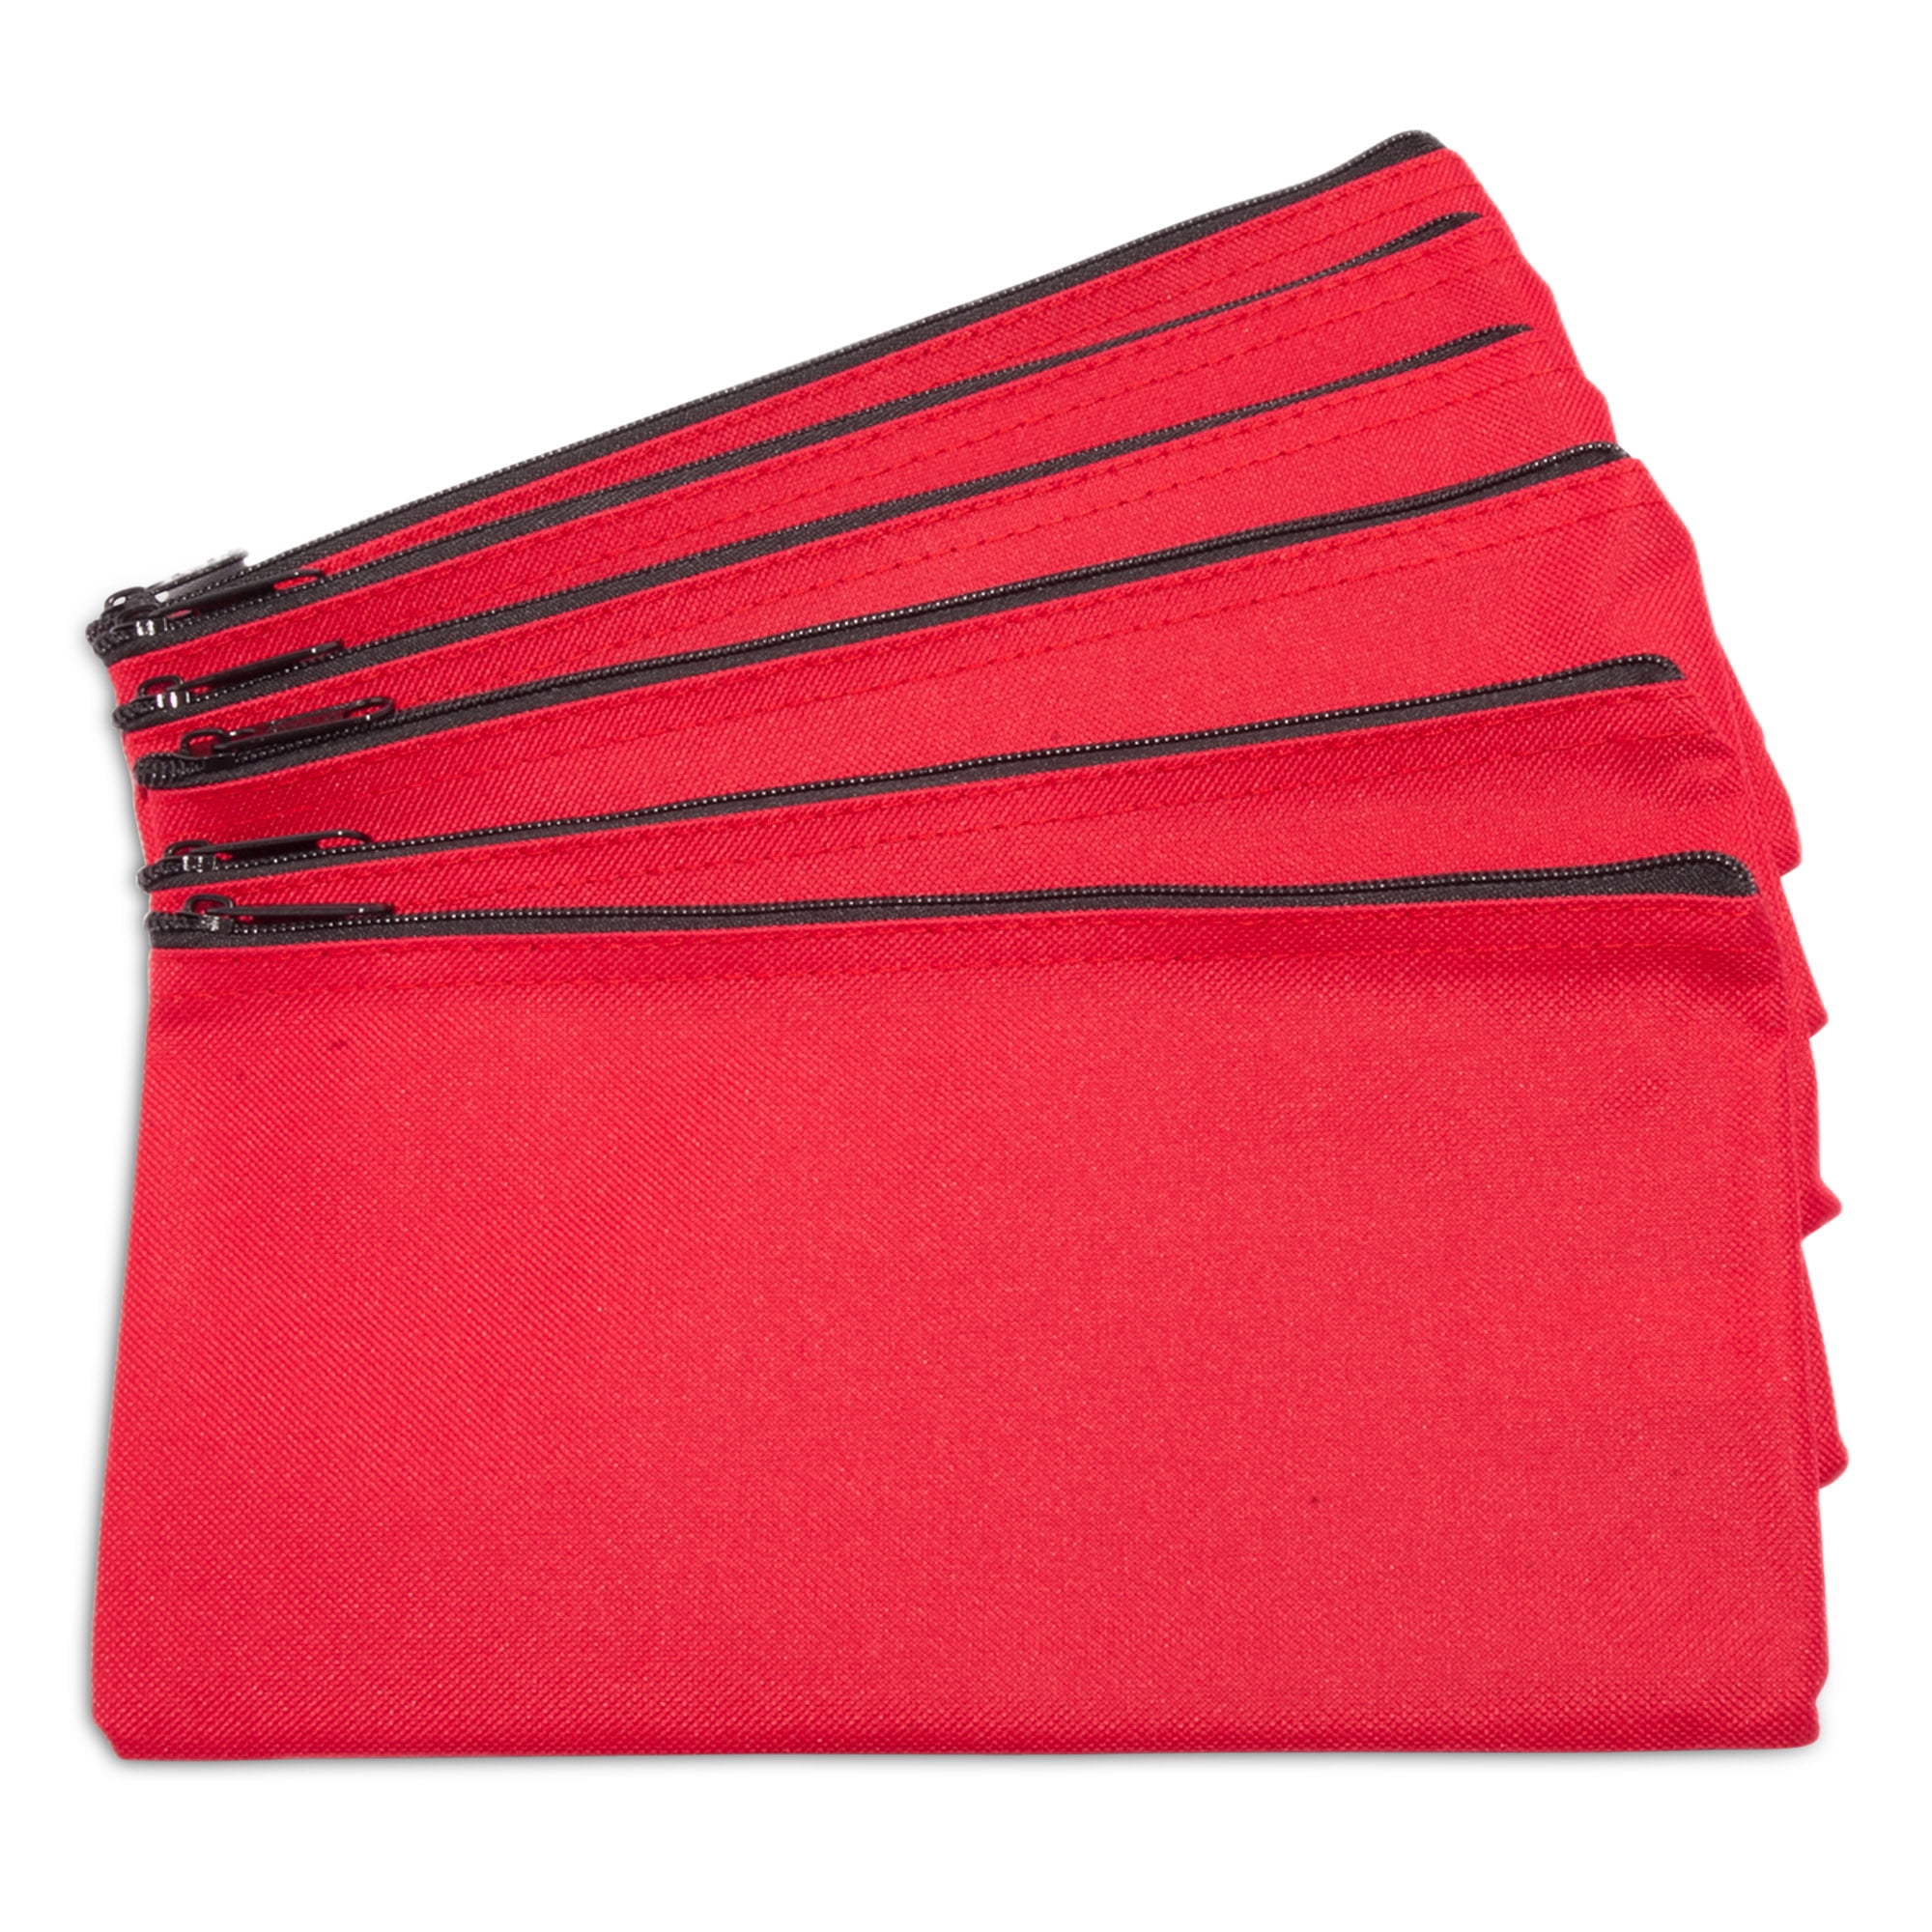 DALIX Zipper Bank Deposit Money Bags Cash Coin Pouch 6 Pack in Red 